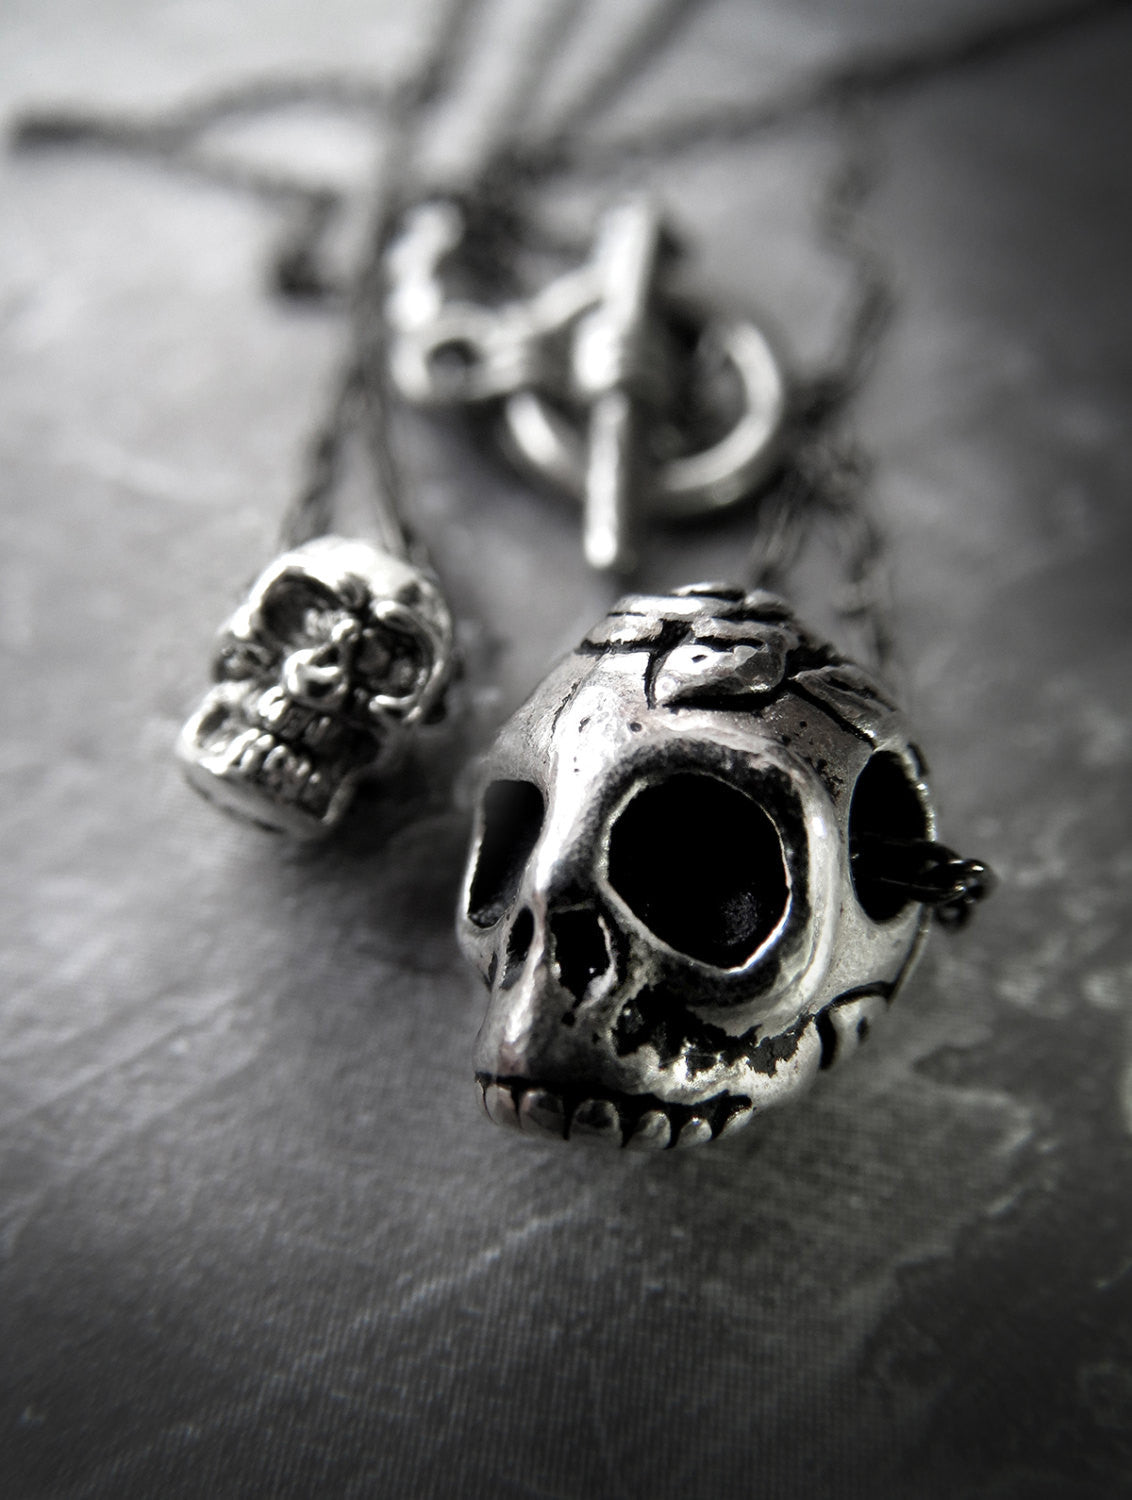 Tiny Silver Skull Pendant Necklaces - 2 Sizes